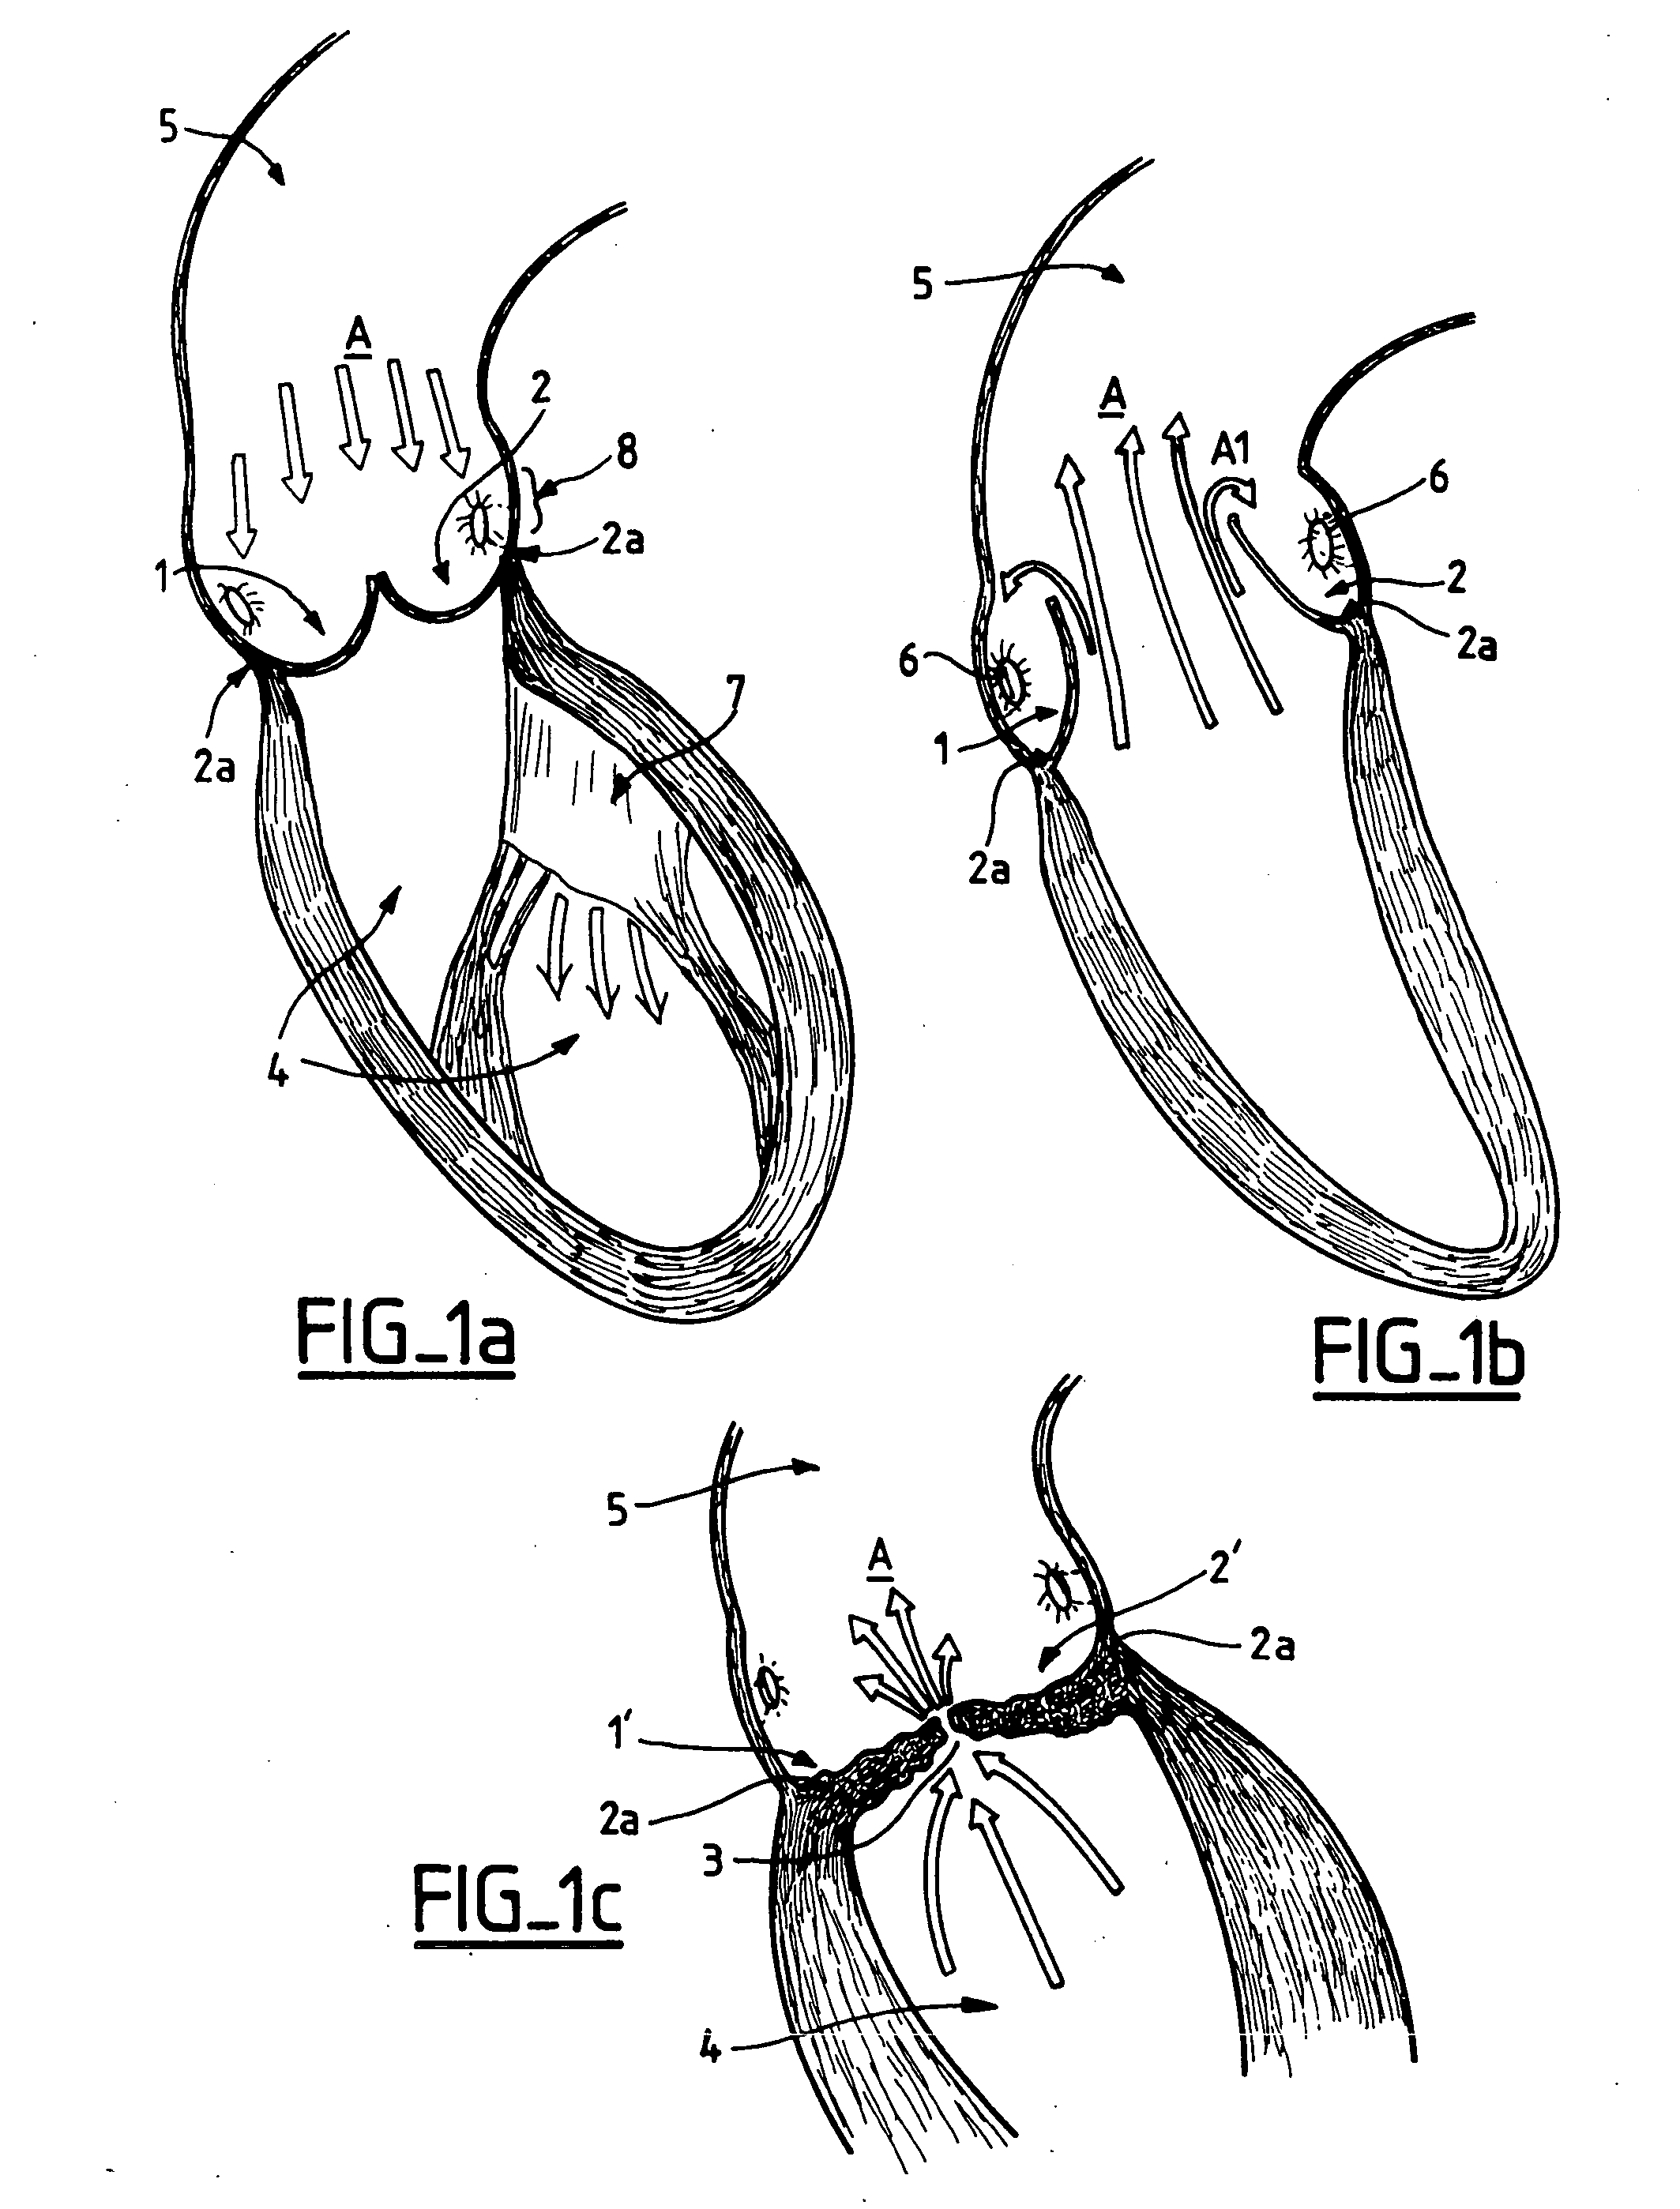 Valve prosthesis for implantation in body channels